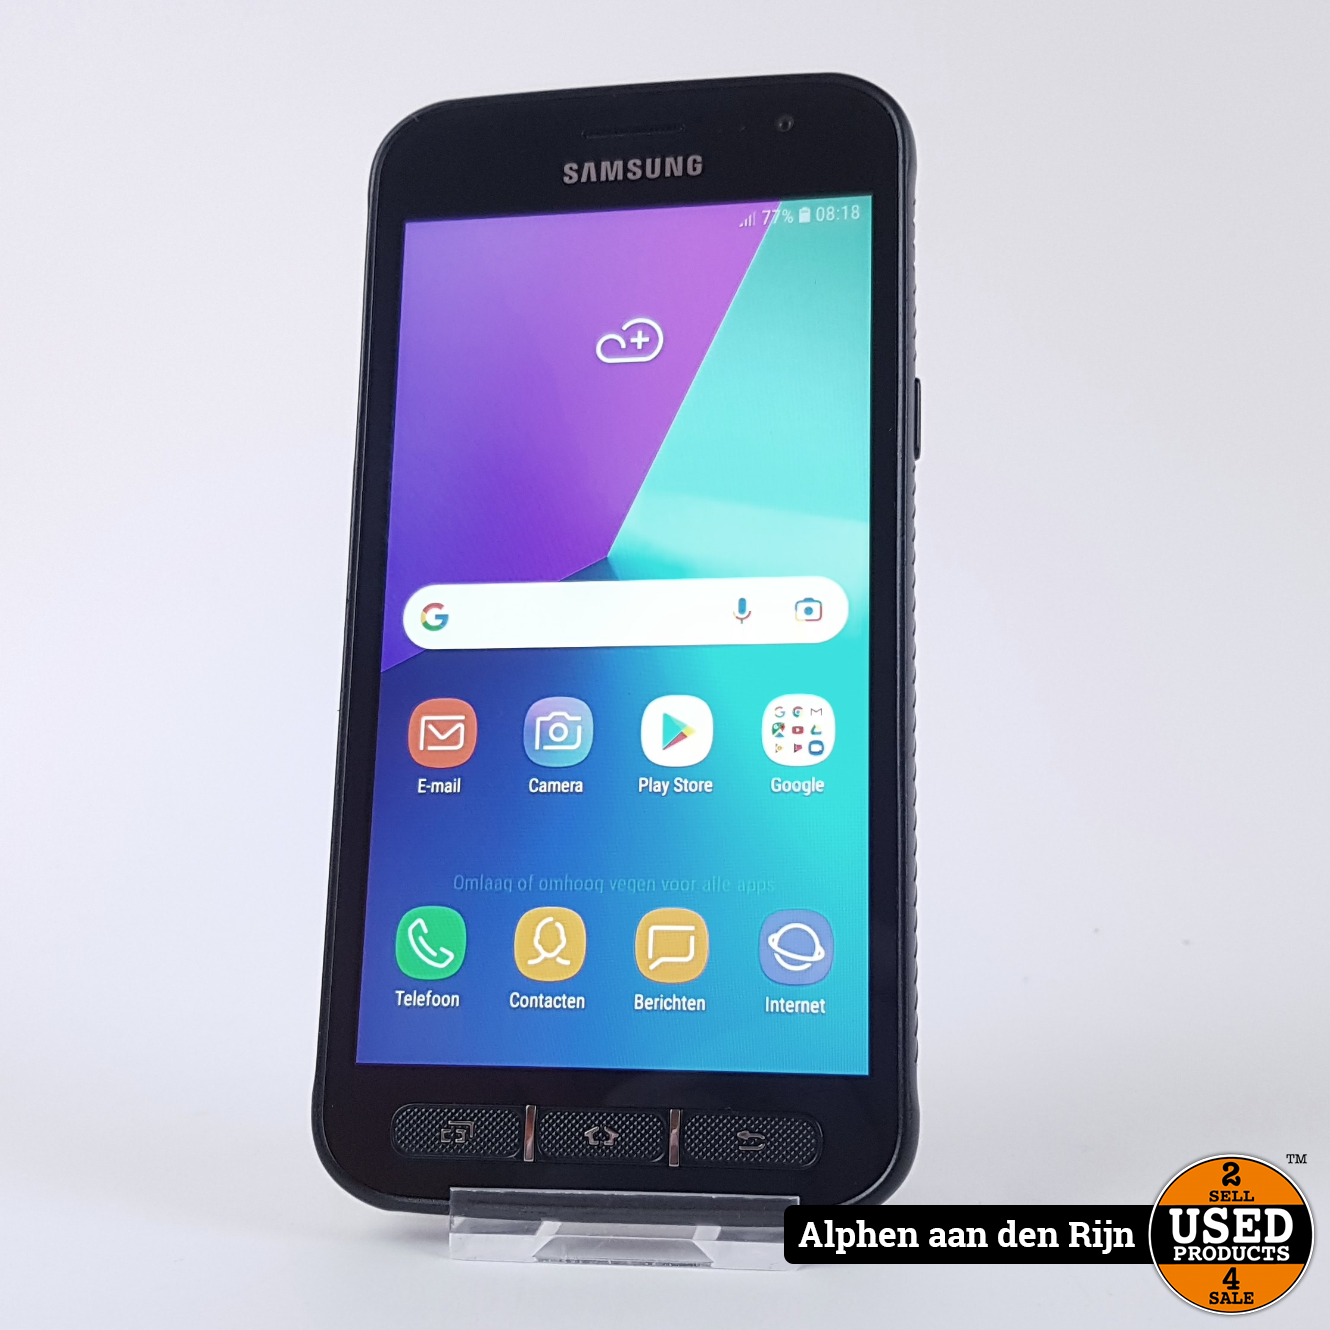 Samsung Galaxy Xcover 4 16gb || Android 8 - Used Alphen aan den Rijn